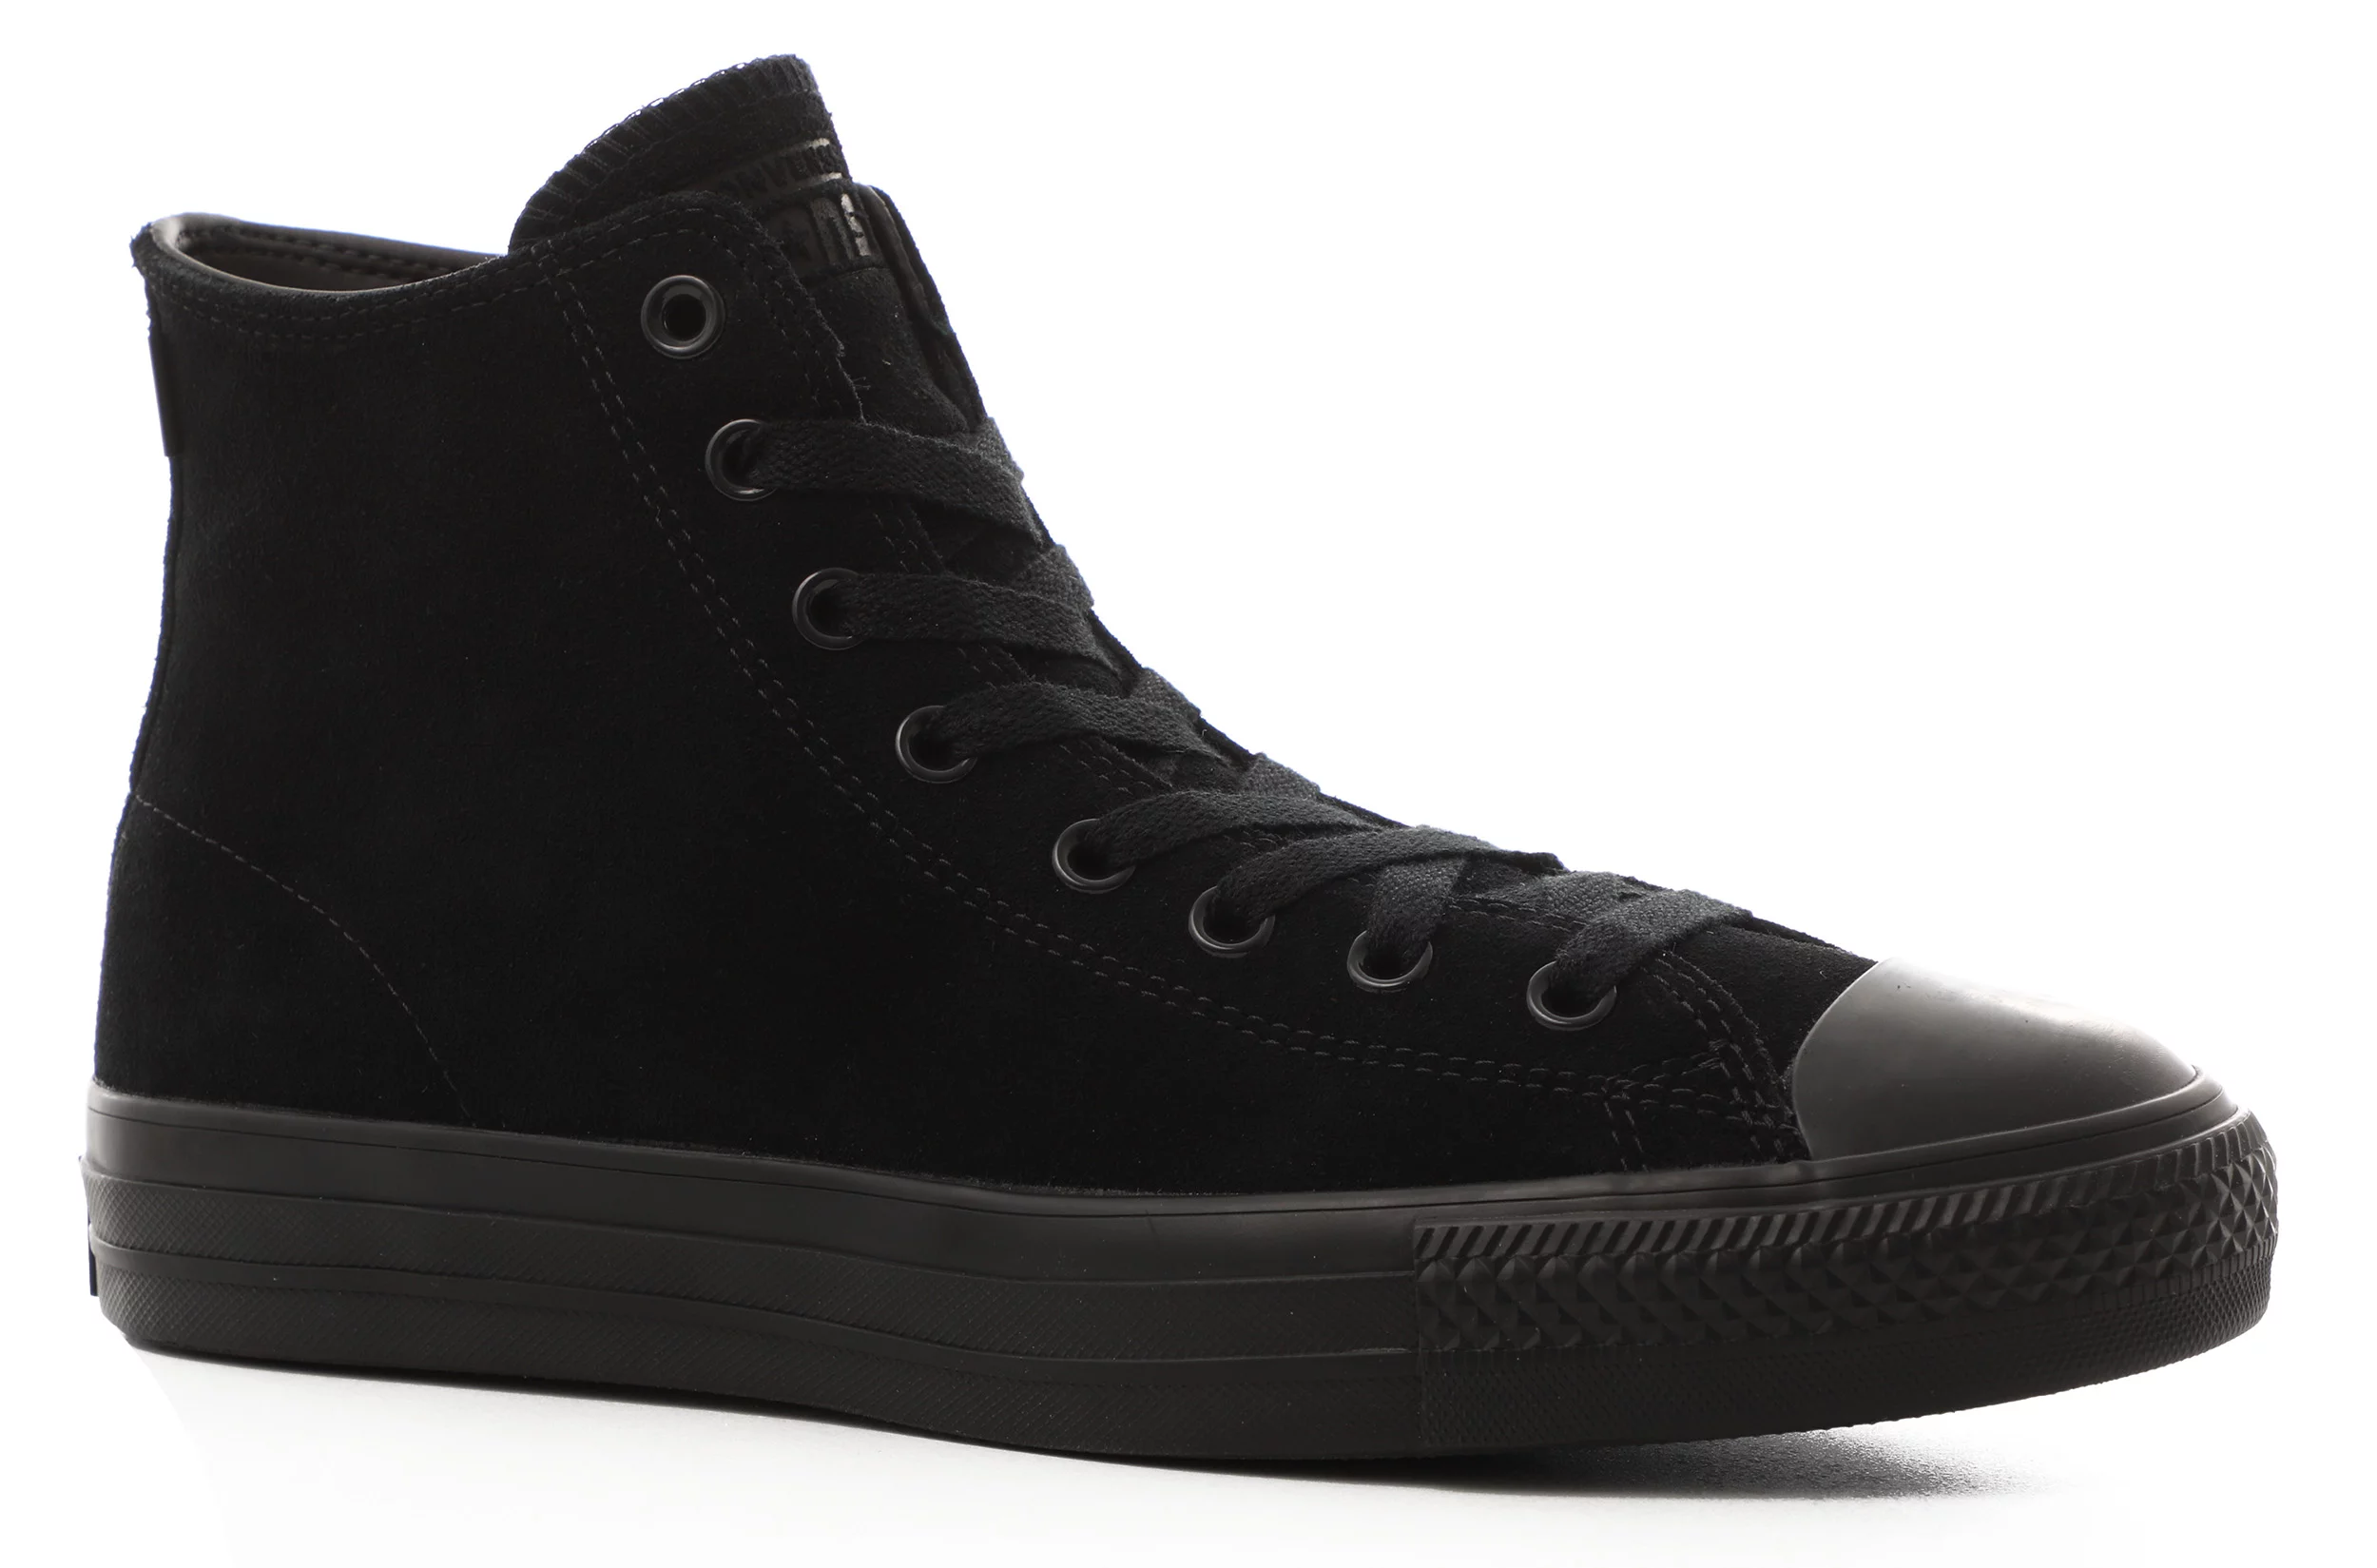 Converse Chuck Taylor All Star Pro High Skate Shoes - (suede